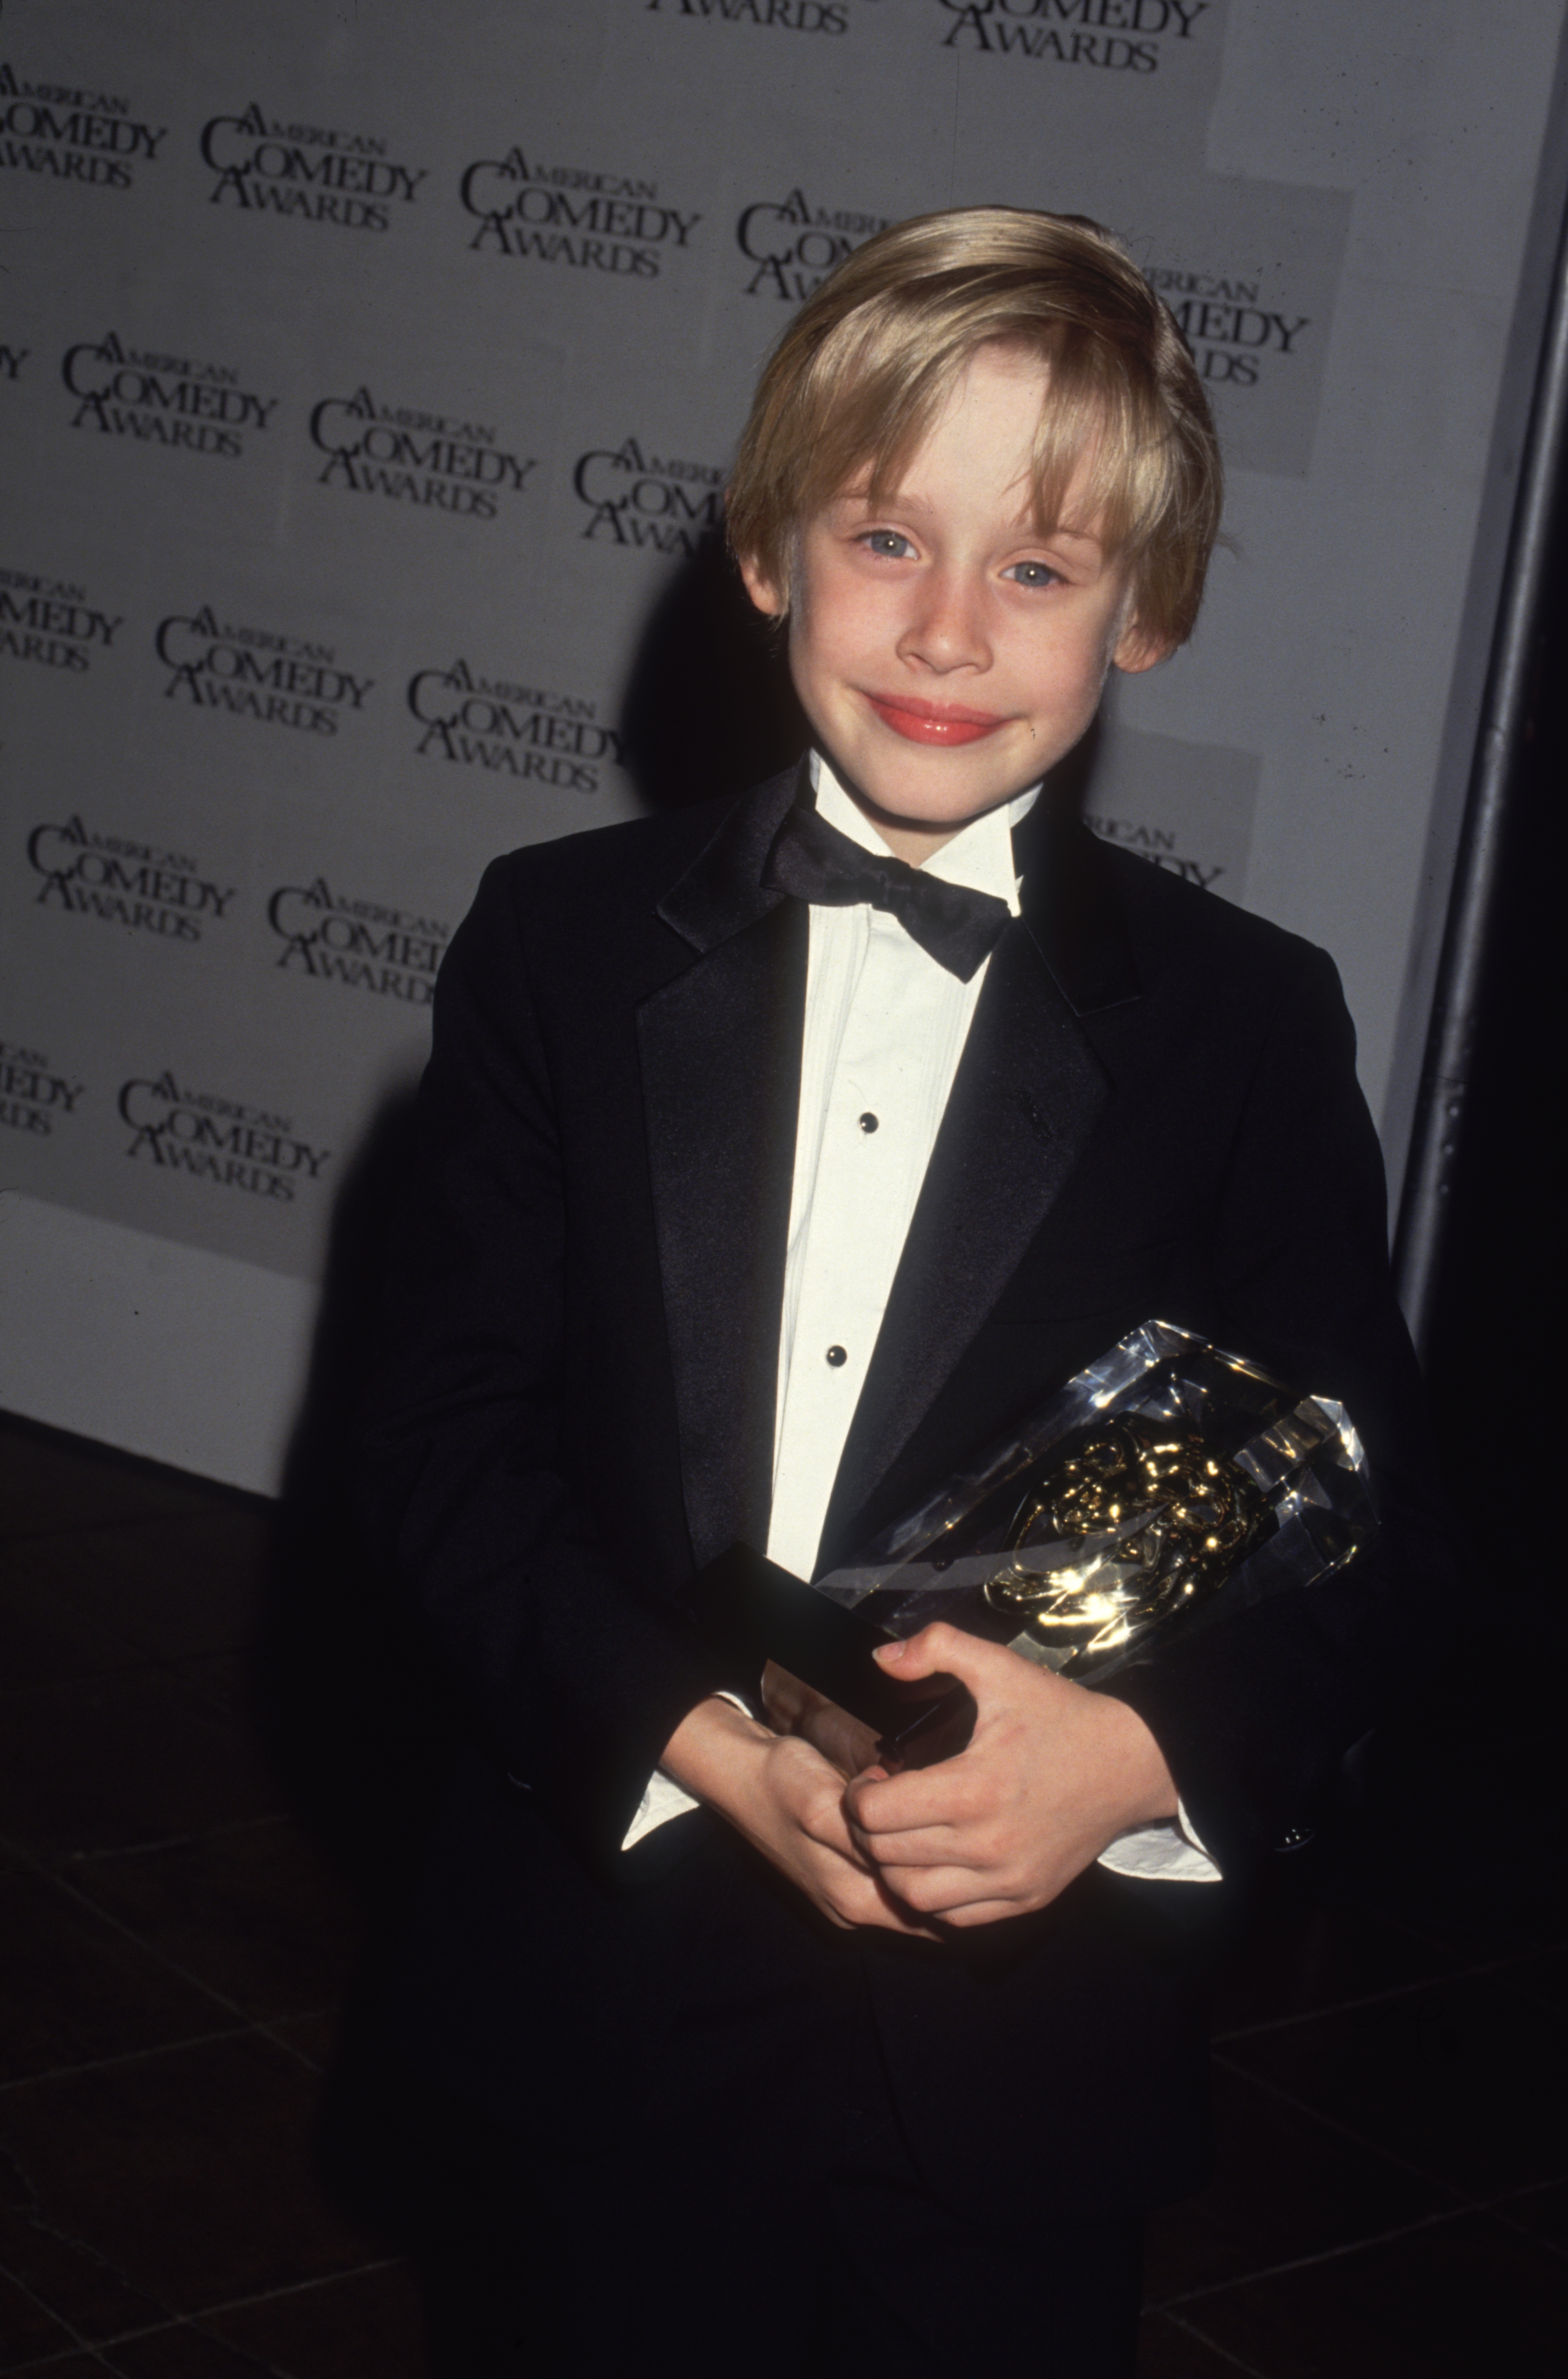 Macaulay Culkin at the American Comedy Awards in 1991 | Source: Getty Images